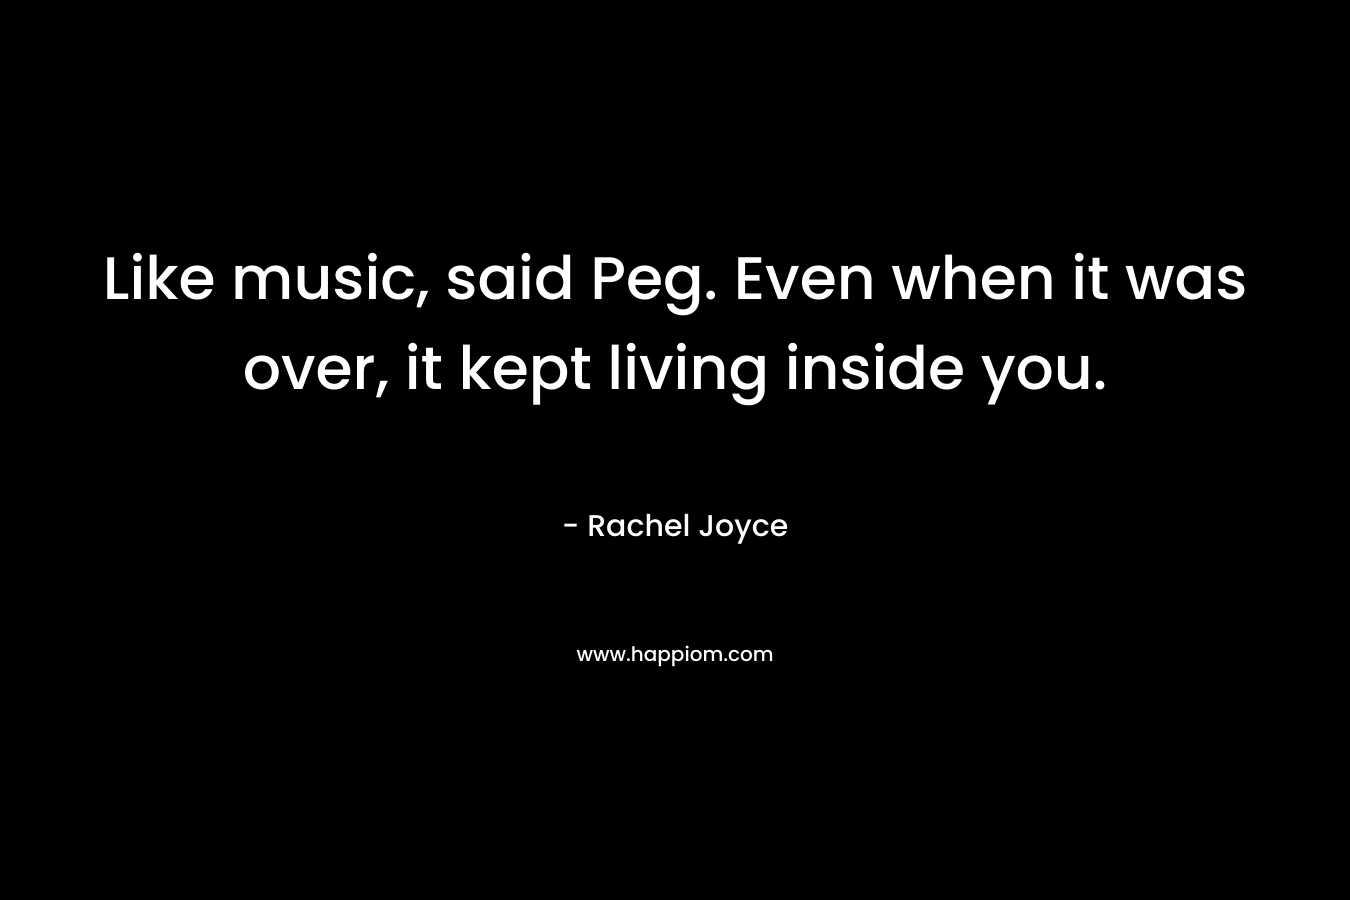 Like music, said Peg. Even when it was over, it kept living inside you.